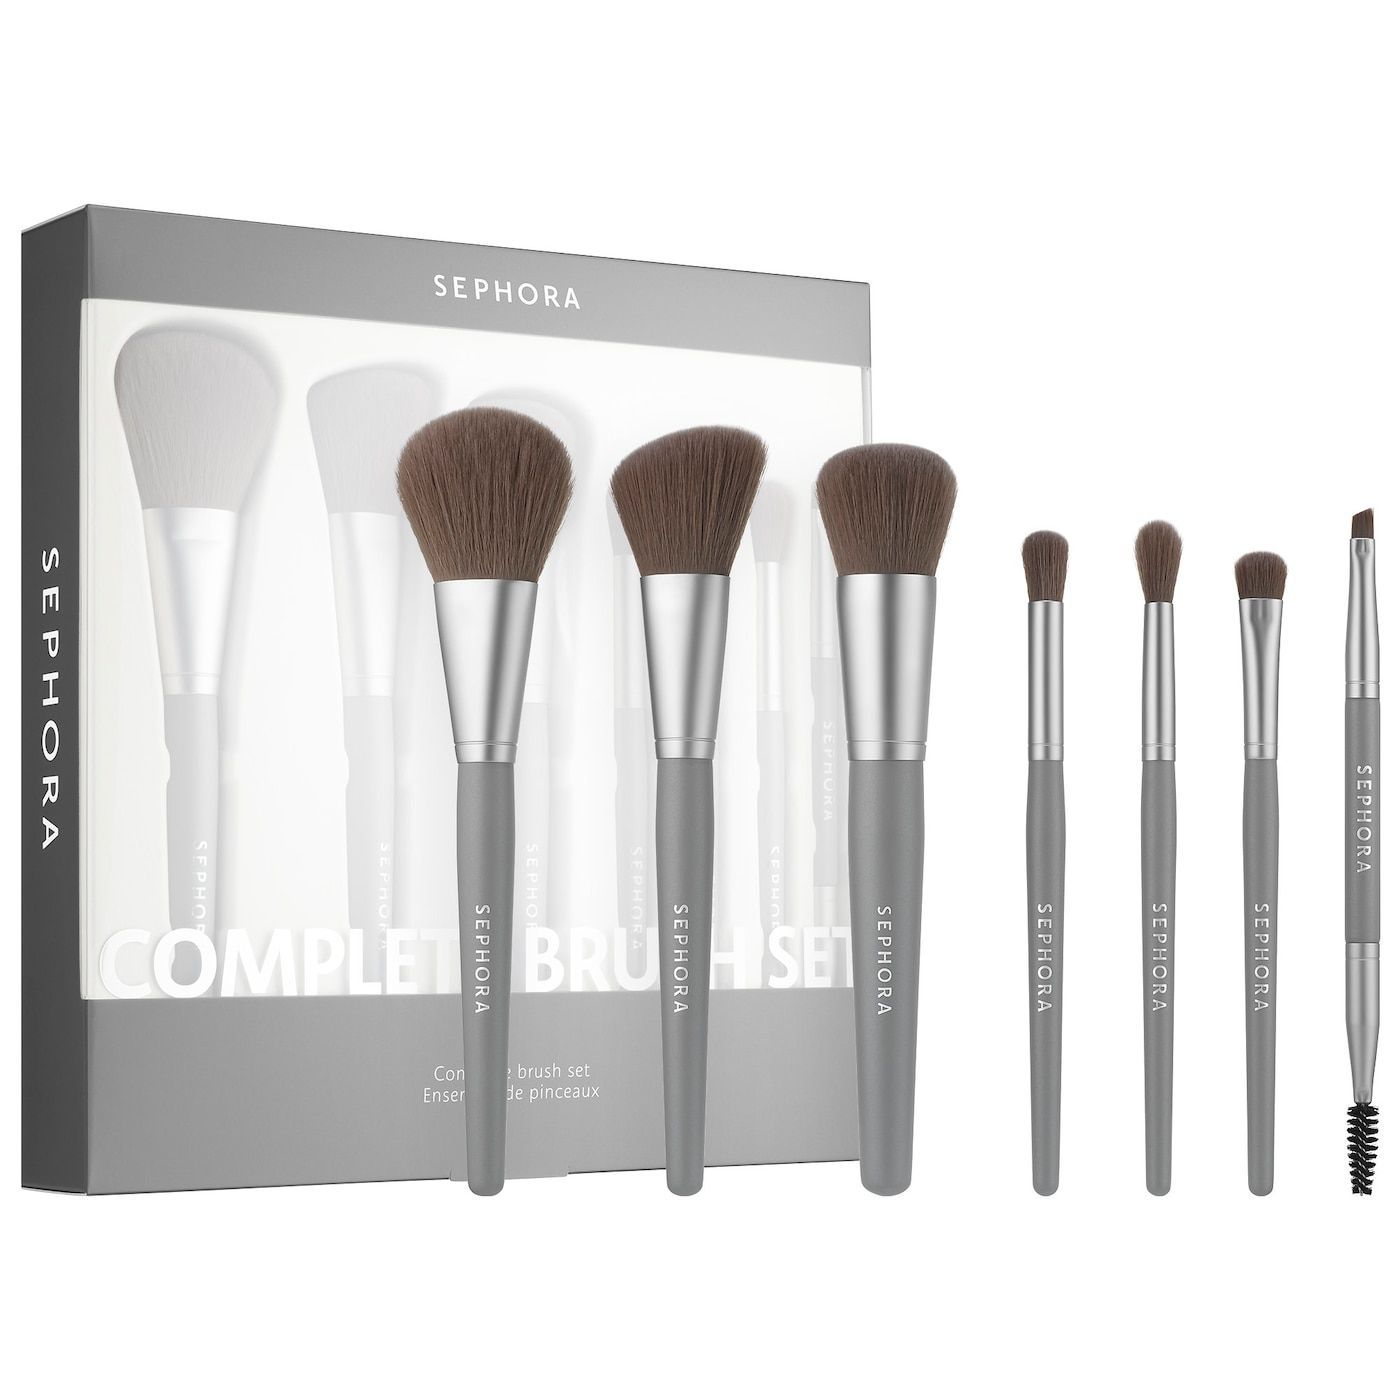 <p><strong>$49.00</strong></p><p><a href="https://go.redirectingat.com?id=74968X1553576&url=https%3A%2F%2Fwww.sephora.com%2Fproduct%2Fsephora-collection-complete-brush-set-P469055&sref=https%3A%2F%2Fwww.townandcountrymag.com%2Fstyle%2Fbeauty-products%2Fg41319024%2Fbest-makeup-brush-sets%2F">Shop Now</a></p><p>For newbies, figuring out the right makeup brush to use can feel daunting at first. Sephora's set, however, takes the guesswork of selecting what to use. The seven-piece collection comes with everything you need for creating any look, including a foundation brush, blush brush, concealer brush, and eyeshadow brush.</p><p>"I am OBSESSED with these brushes!!!" raves a Sephora reviewer. "The bristles are sooo soft and apply my makeup so beautifully. Plus these brushes are vegan which I LOVE. This is a greater starter kit for beginners. Also very budget friendly!!"</p>